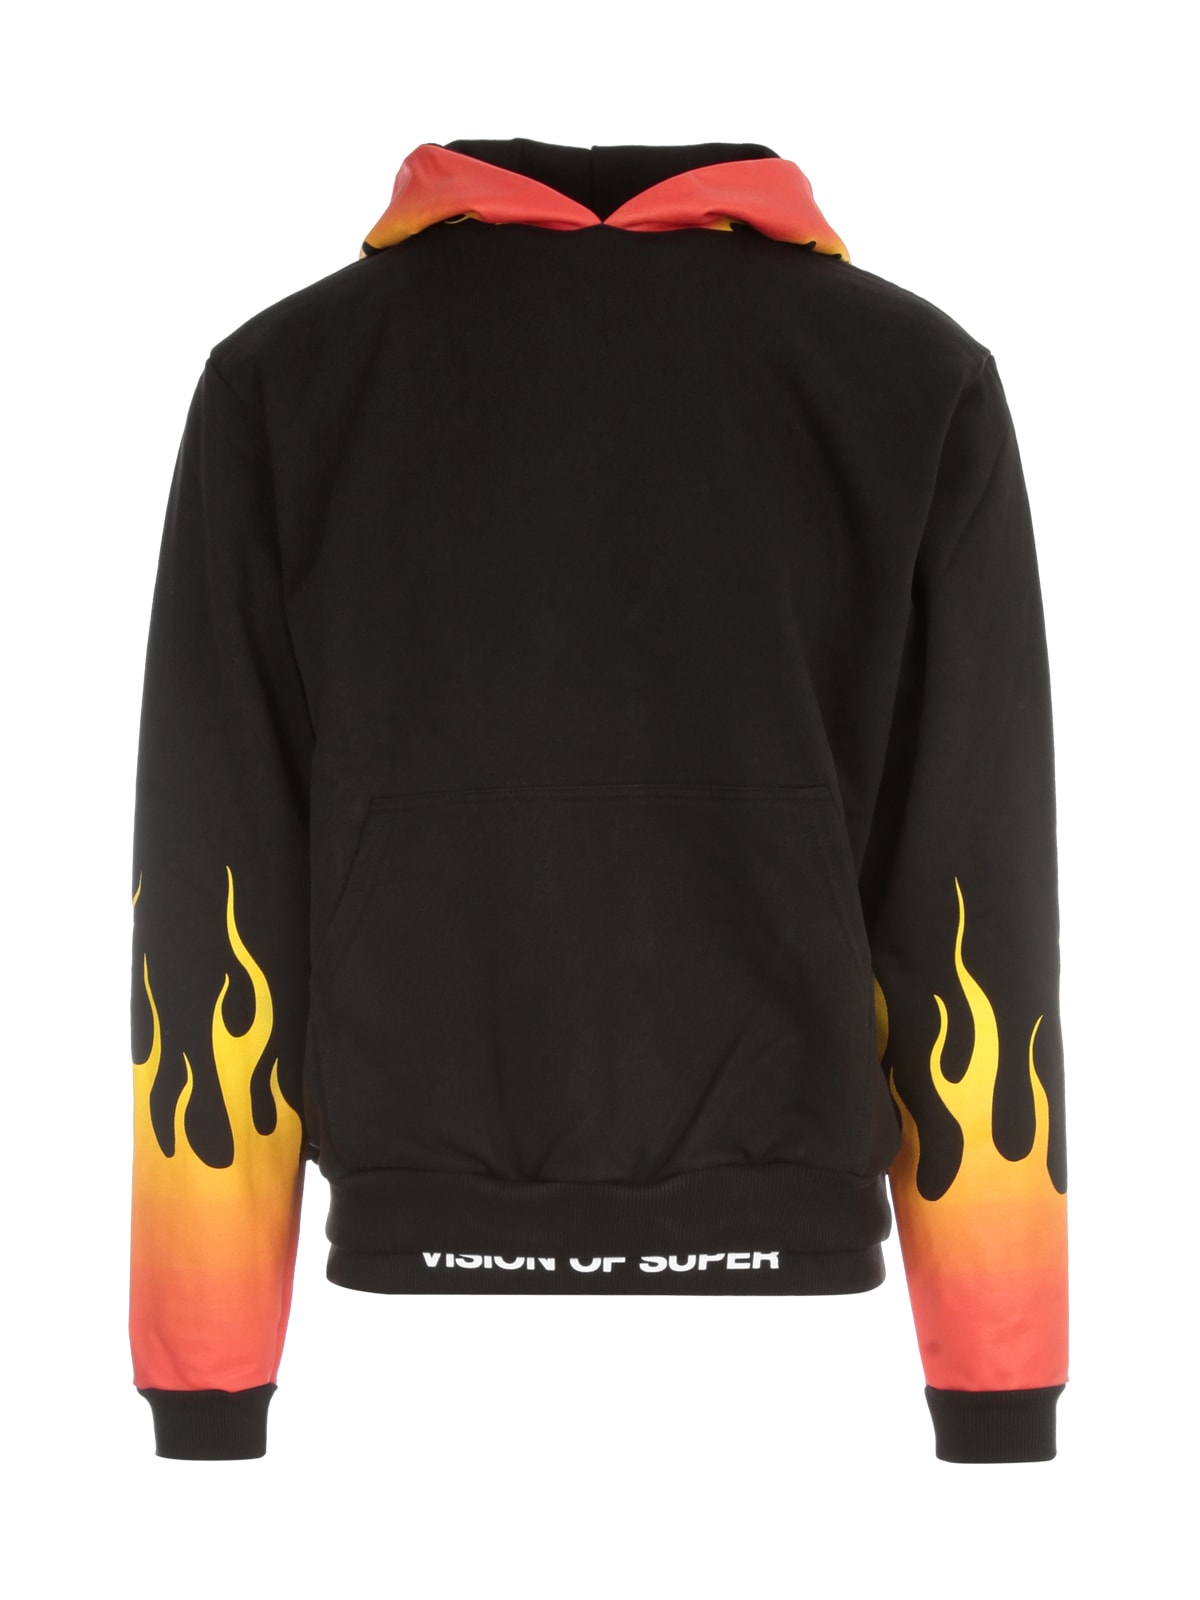 Vision of Super Black Hoodie W/red Shaded Flames